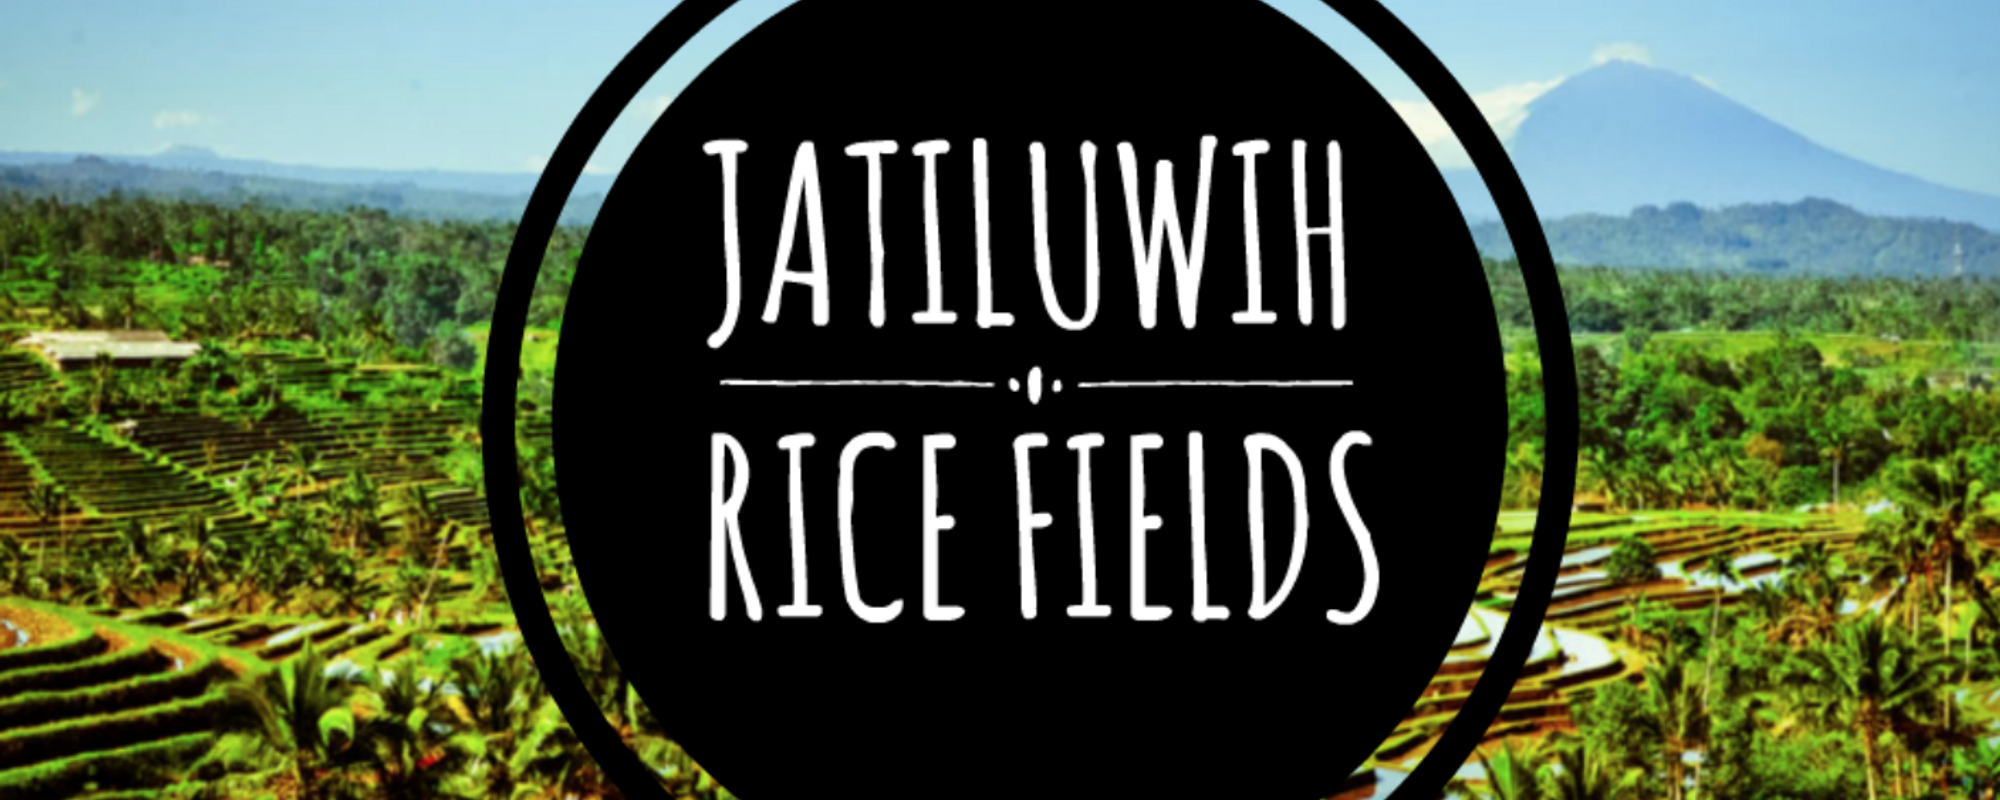 The Best Rice Field In Bali (That Nobody Knows About)